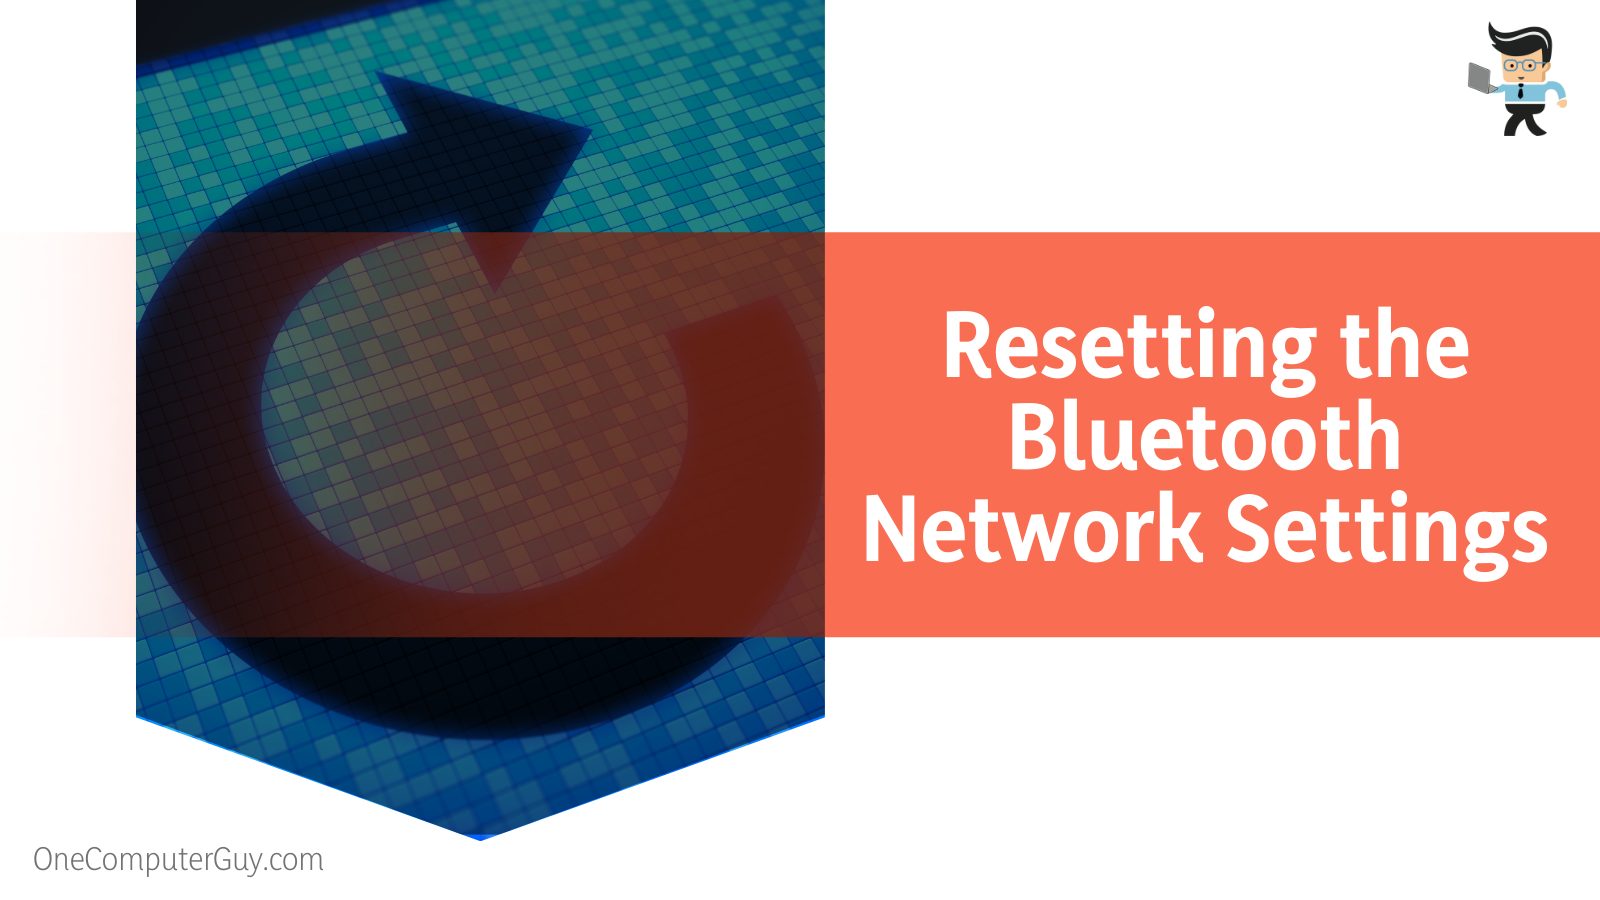 Resetting the Bluetooth Network Settings